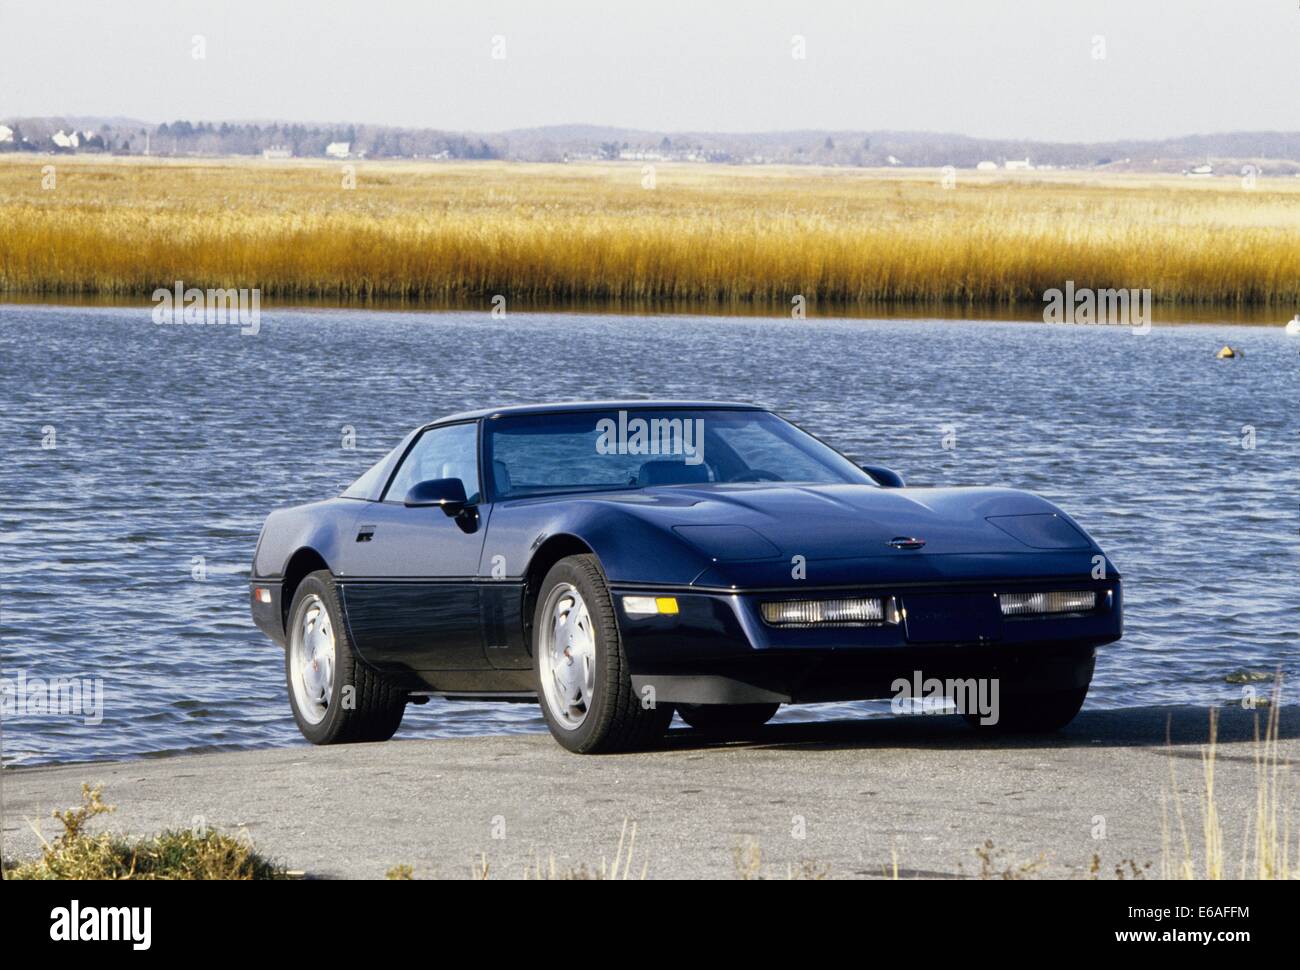 Chevrolet Corvette C4 Callaway modified version - 1988 Model Year MY - showing front and side view against a lake river background backdrop Stock Photo